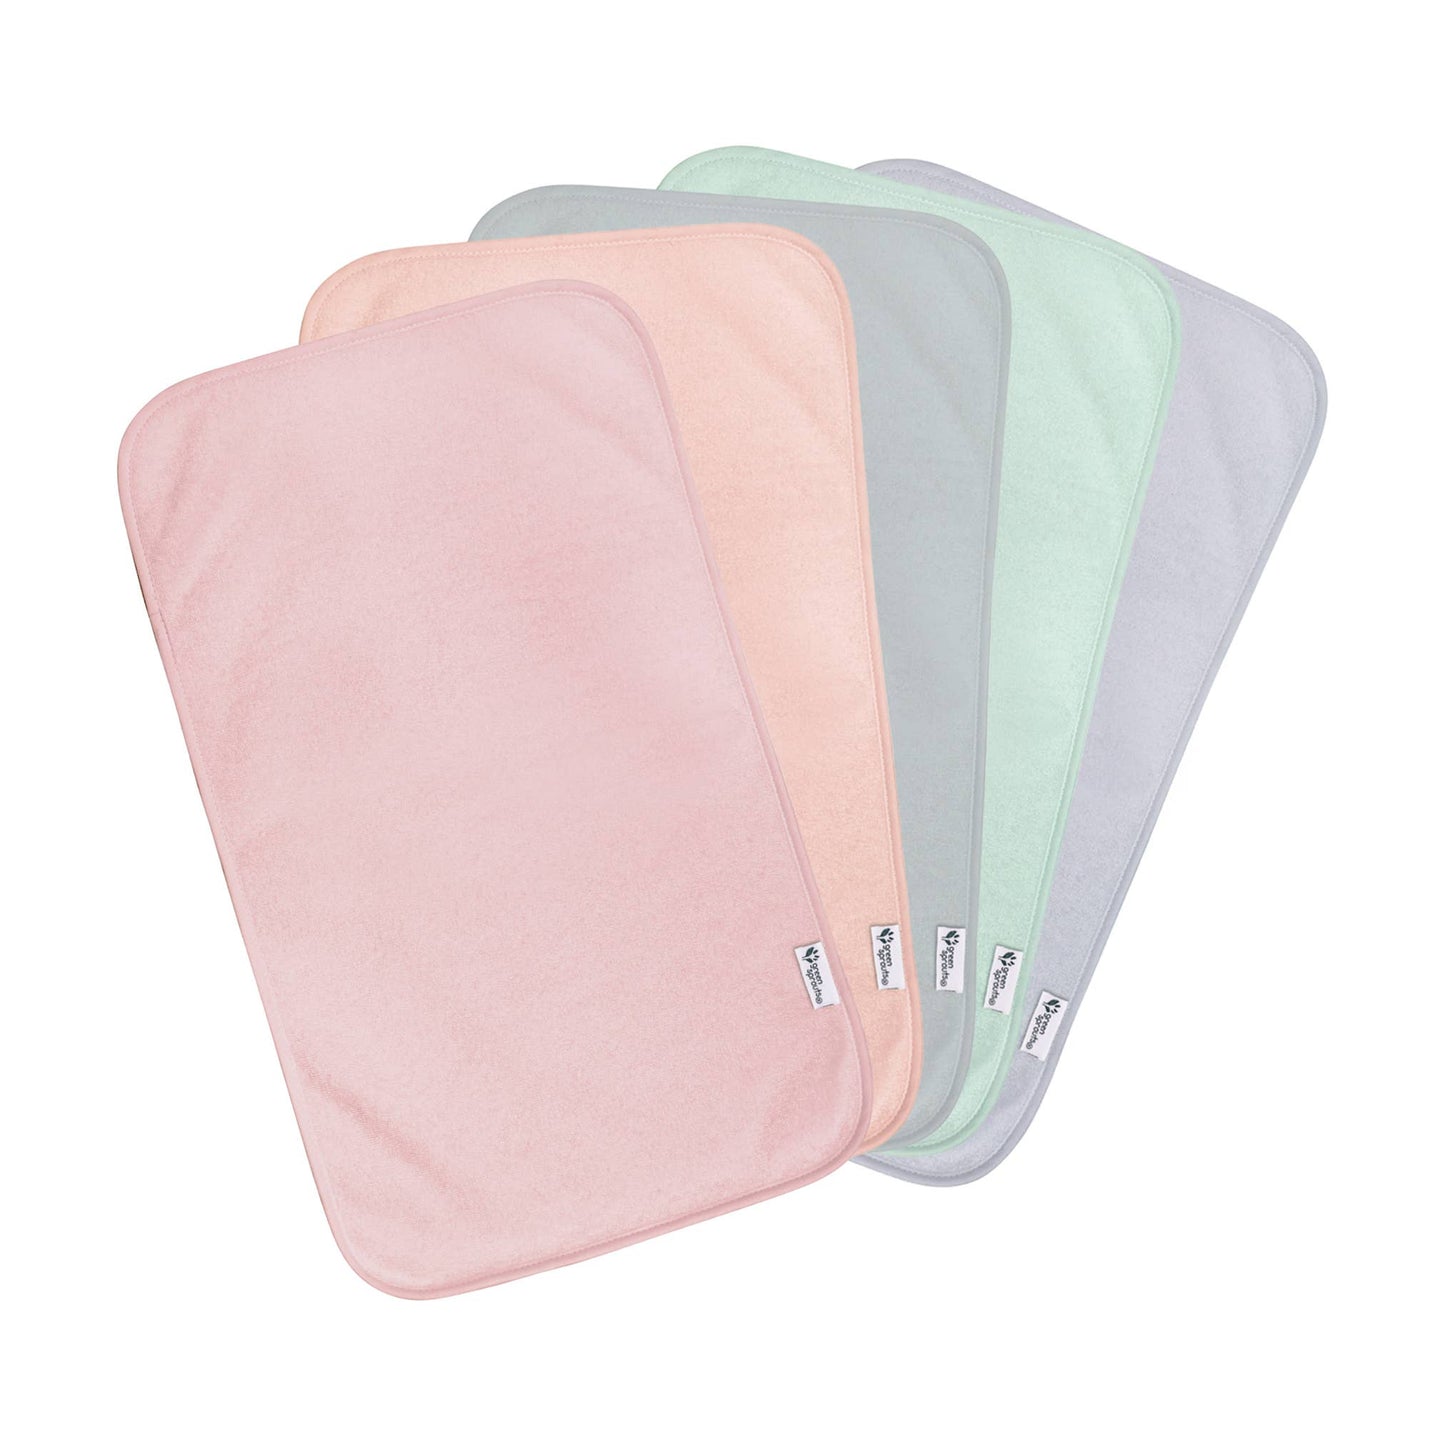 Green Sprouts - Stay-Dry Burp Pads (5pk)